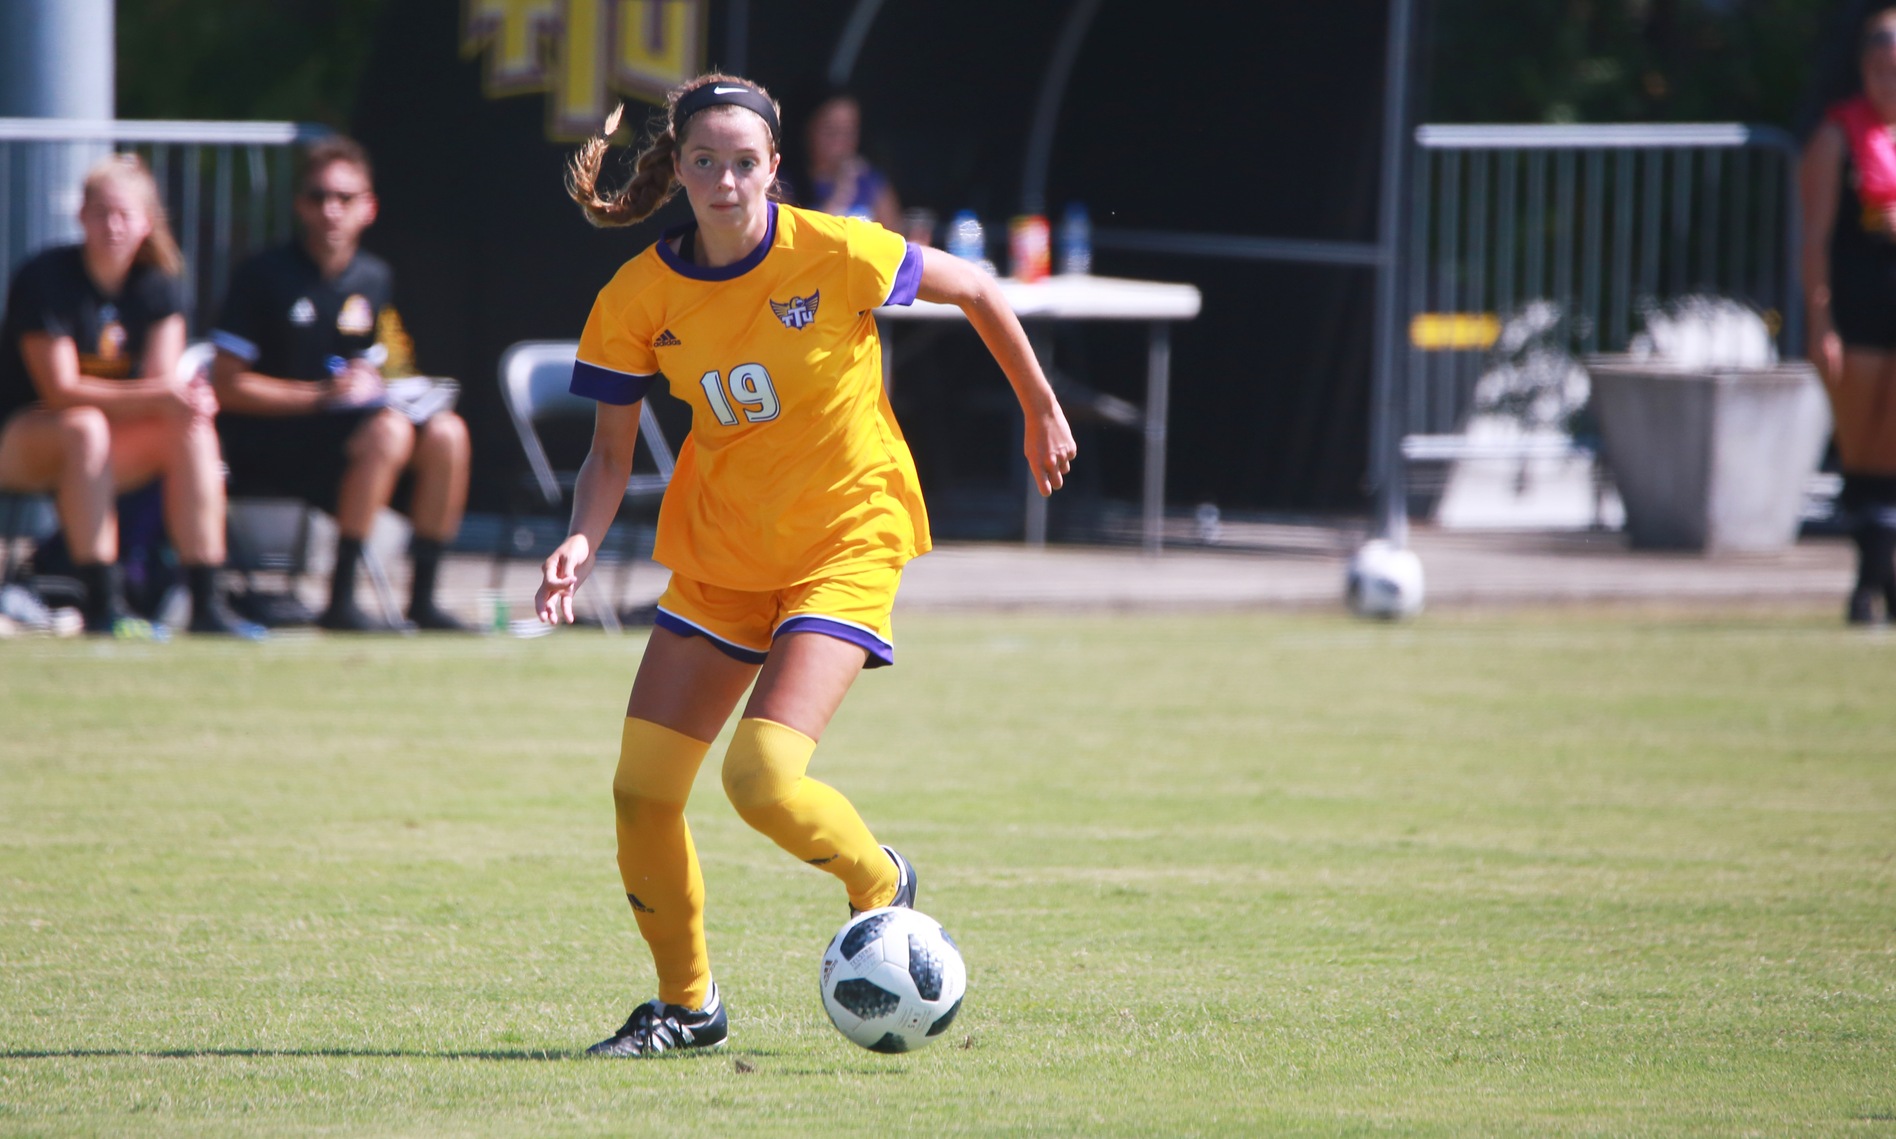 Freshman Bailey Taylor named OVC Offensive Player of the Week